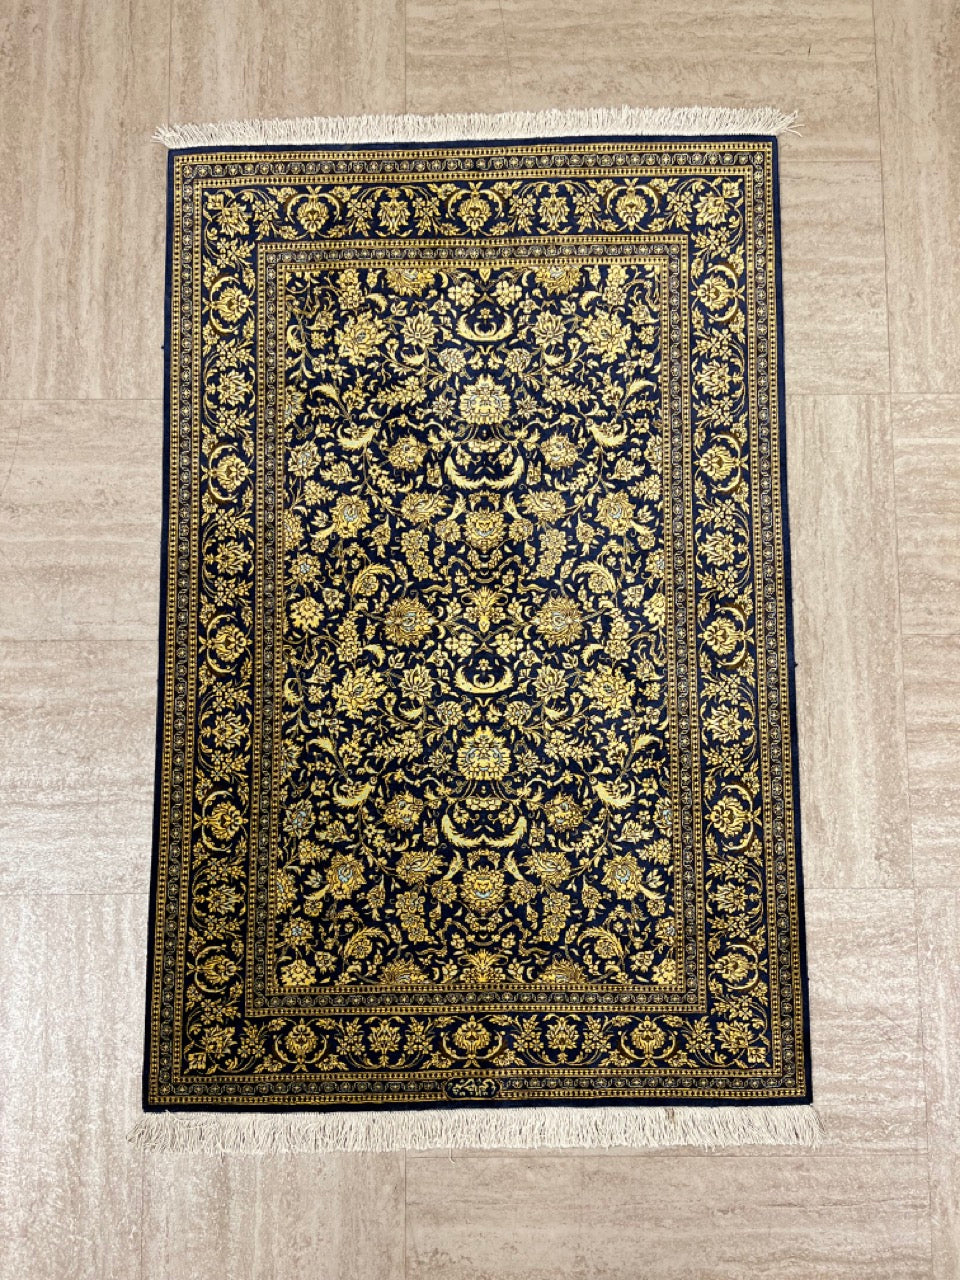 Gold Blue Hand-Woven Traditional Persian Silk Qom Rug product image #27562531422378